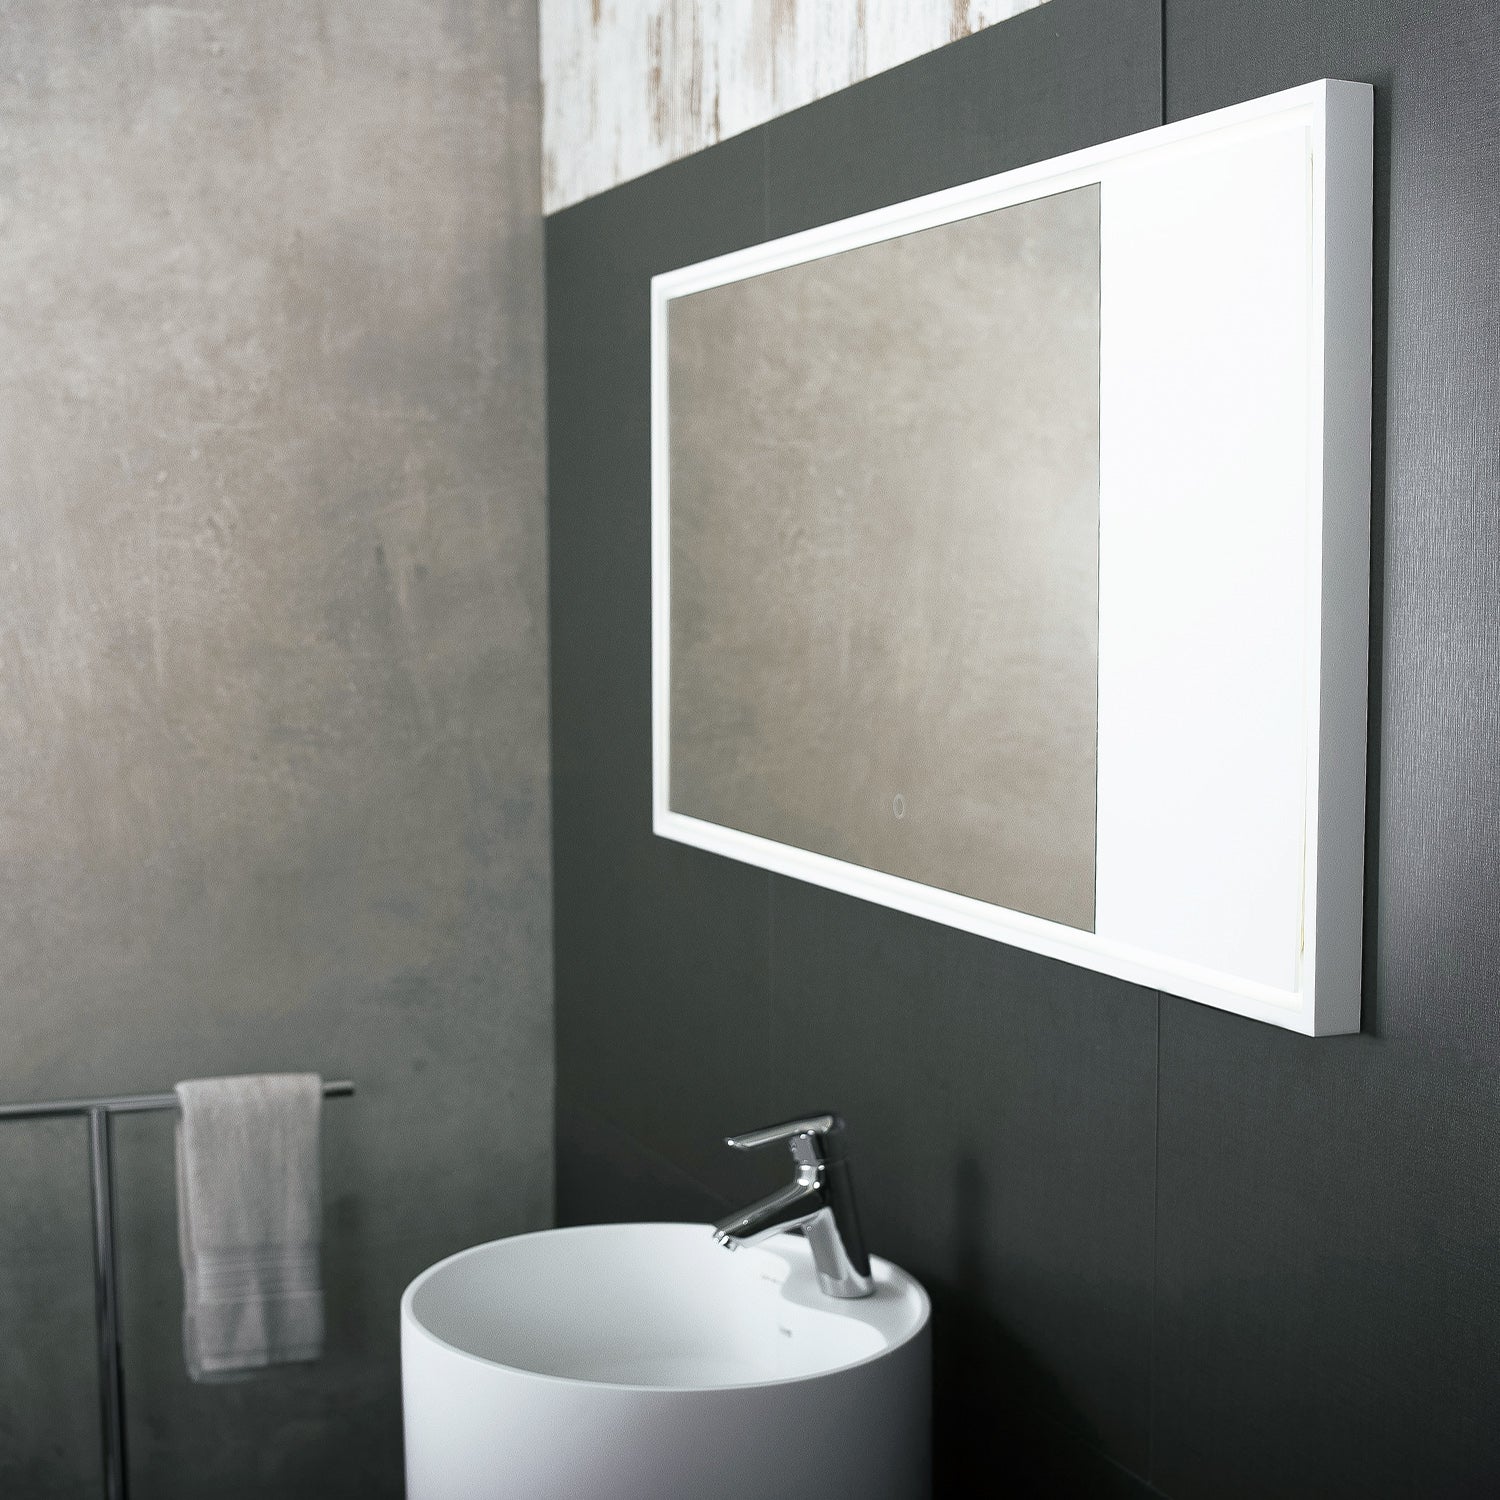 DAX Solid Surface Rectangle LED Backlit Bathroom Vanity Mirror, Wall Mount, 46-7/16 x 23-2/3 x 1-3/8 Inches (DAX-AB-1570)